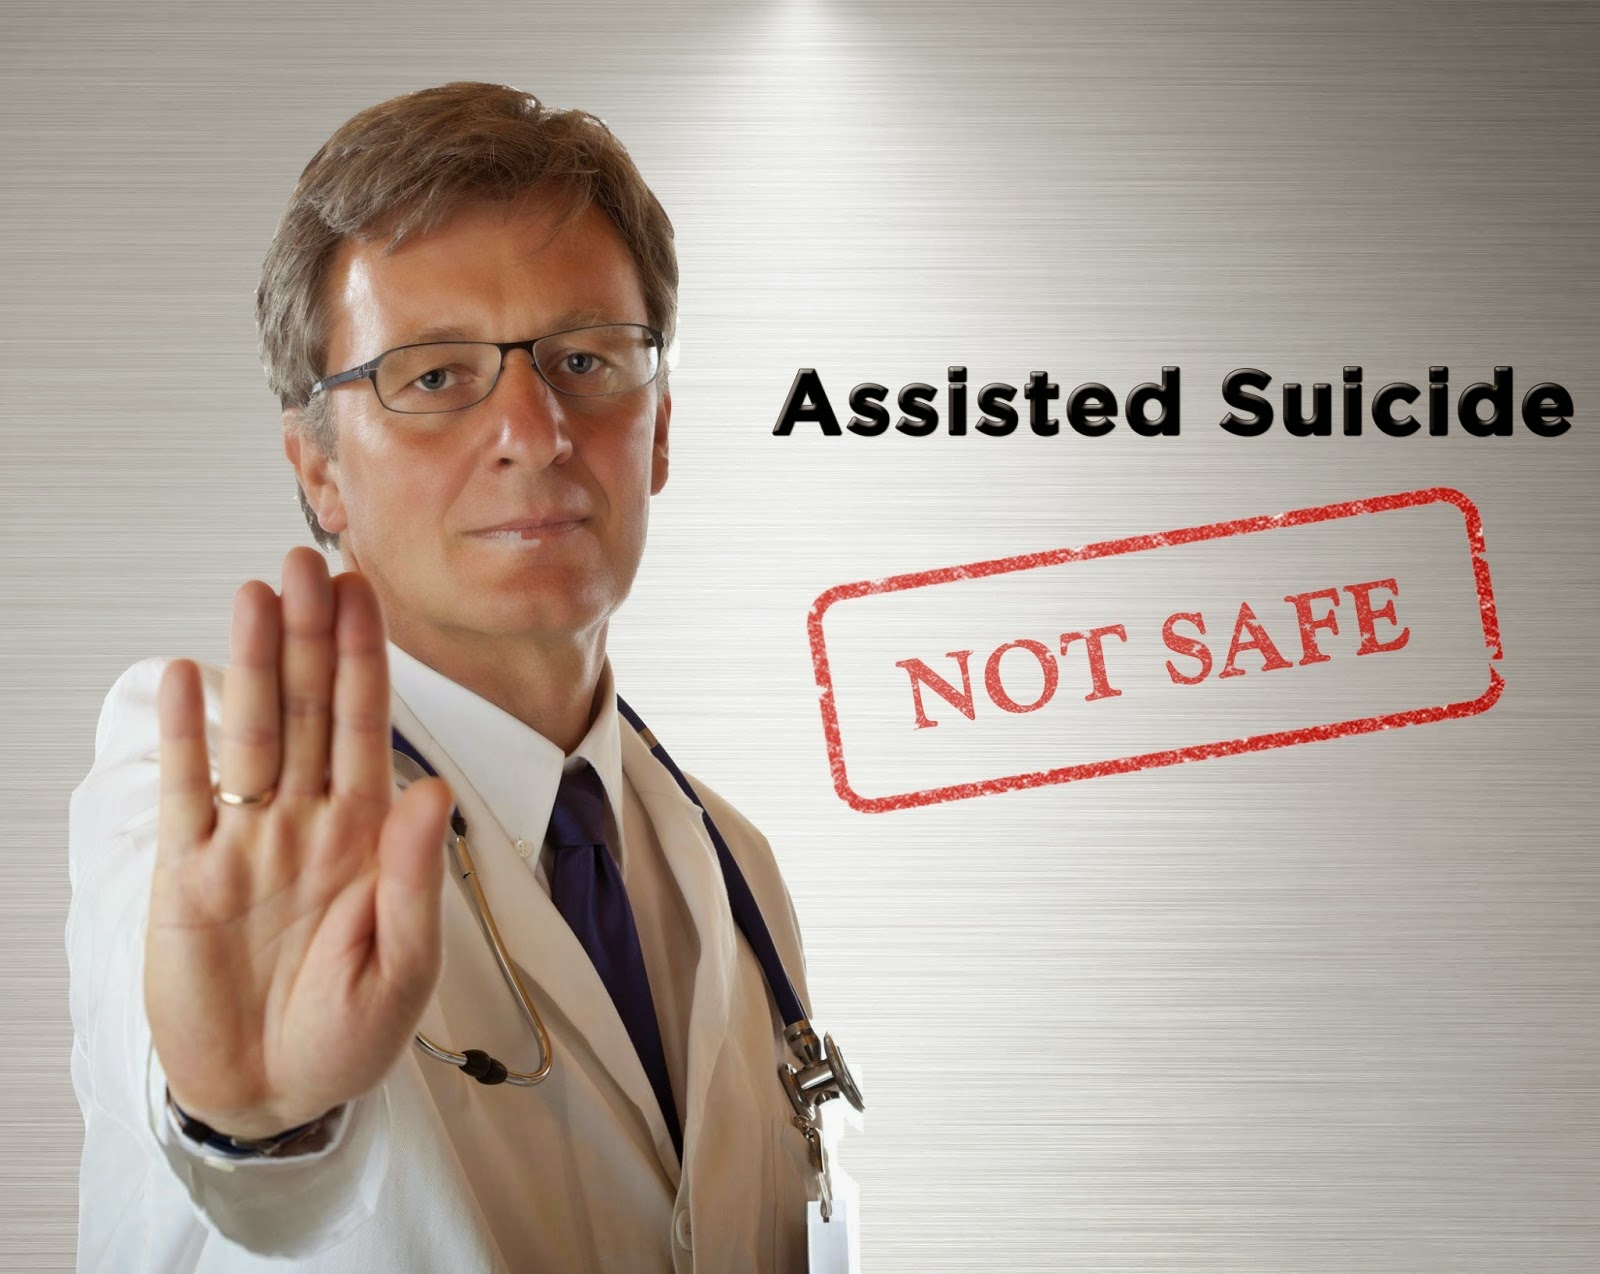 Assisted suicide